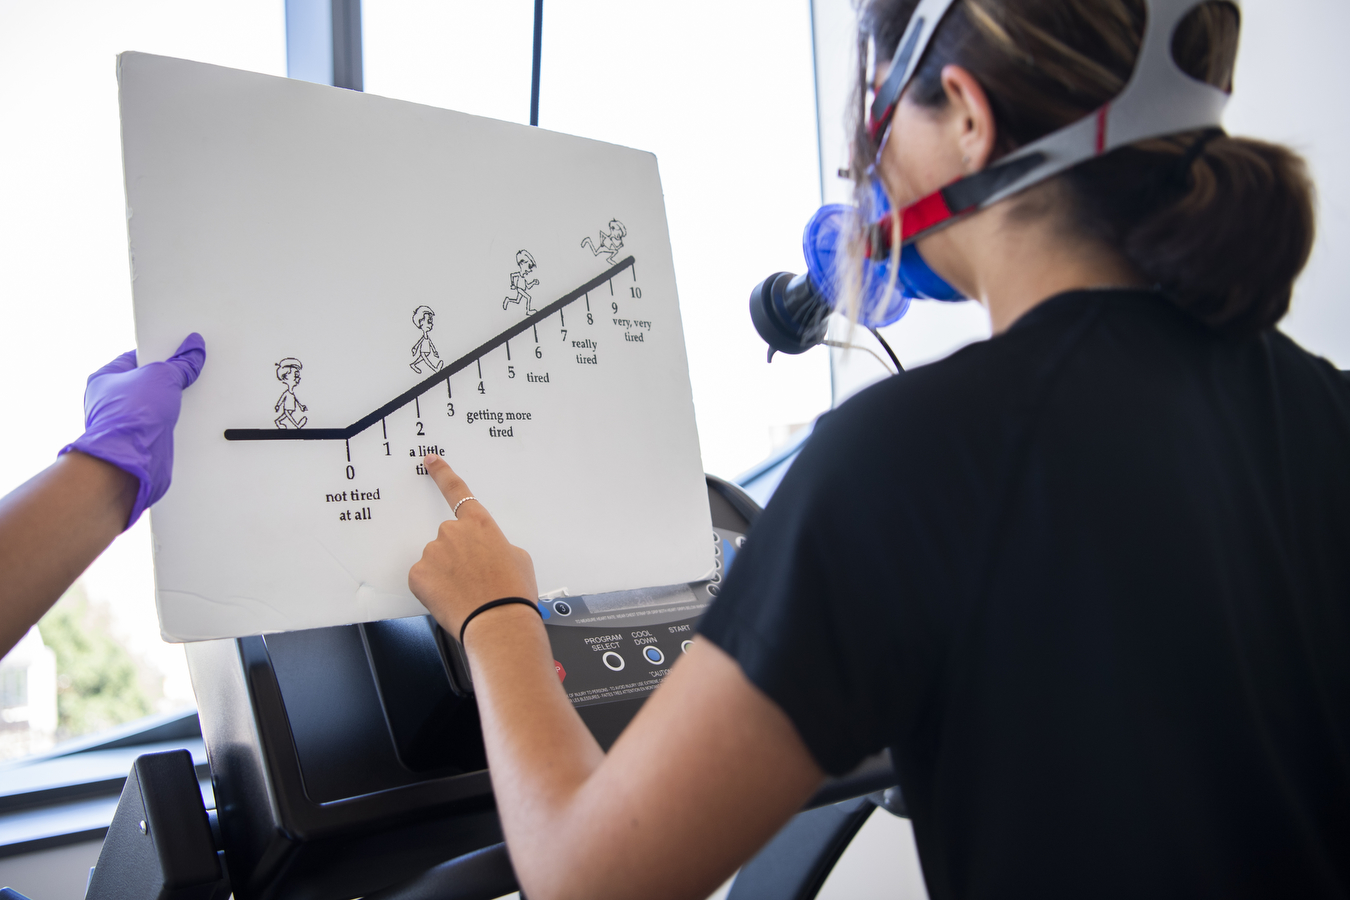 A study participant wearing a device that measures aerobic capacity around the face points to a number on a chart held out in front of them